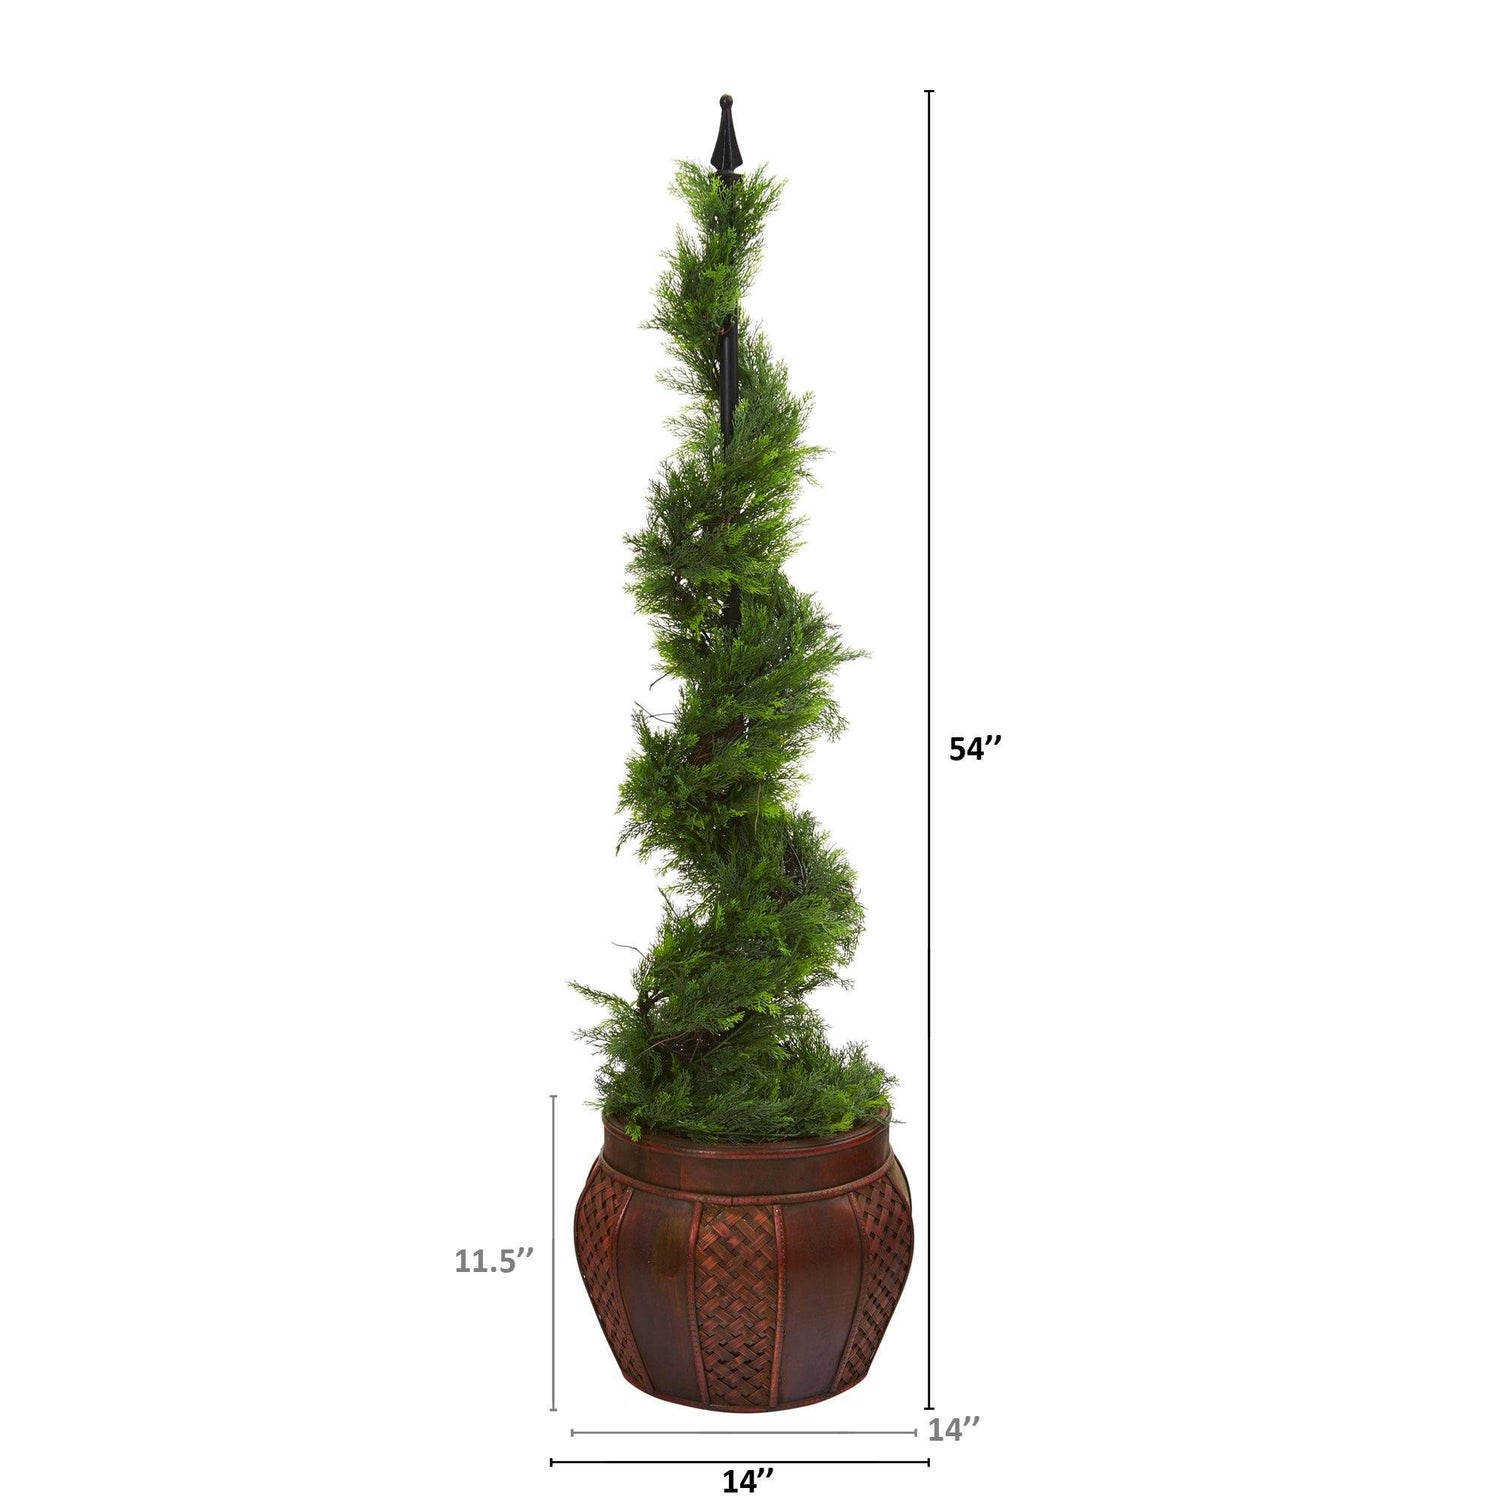 4.5’ Cypress Artificial Spiral Topiary Tree in Decorative Planter